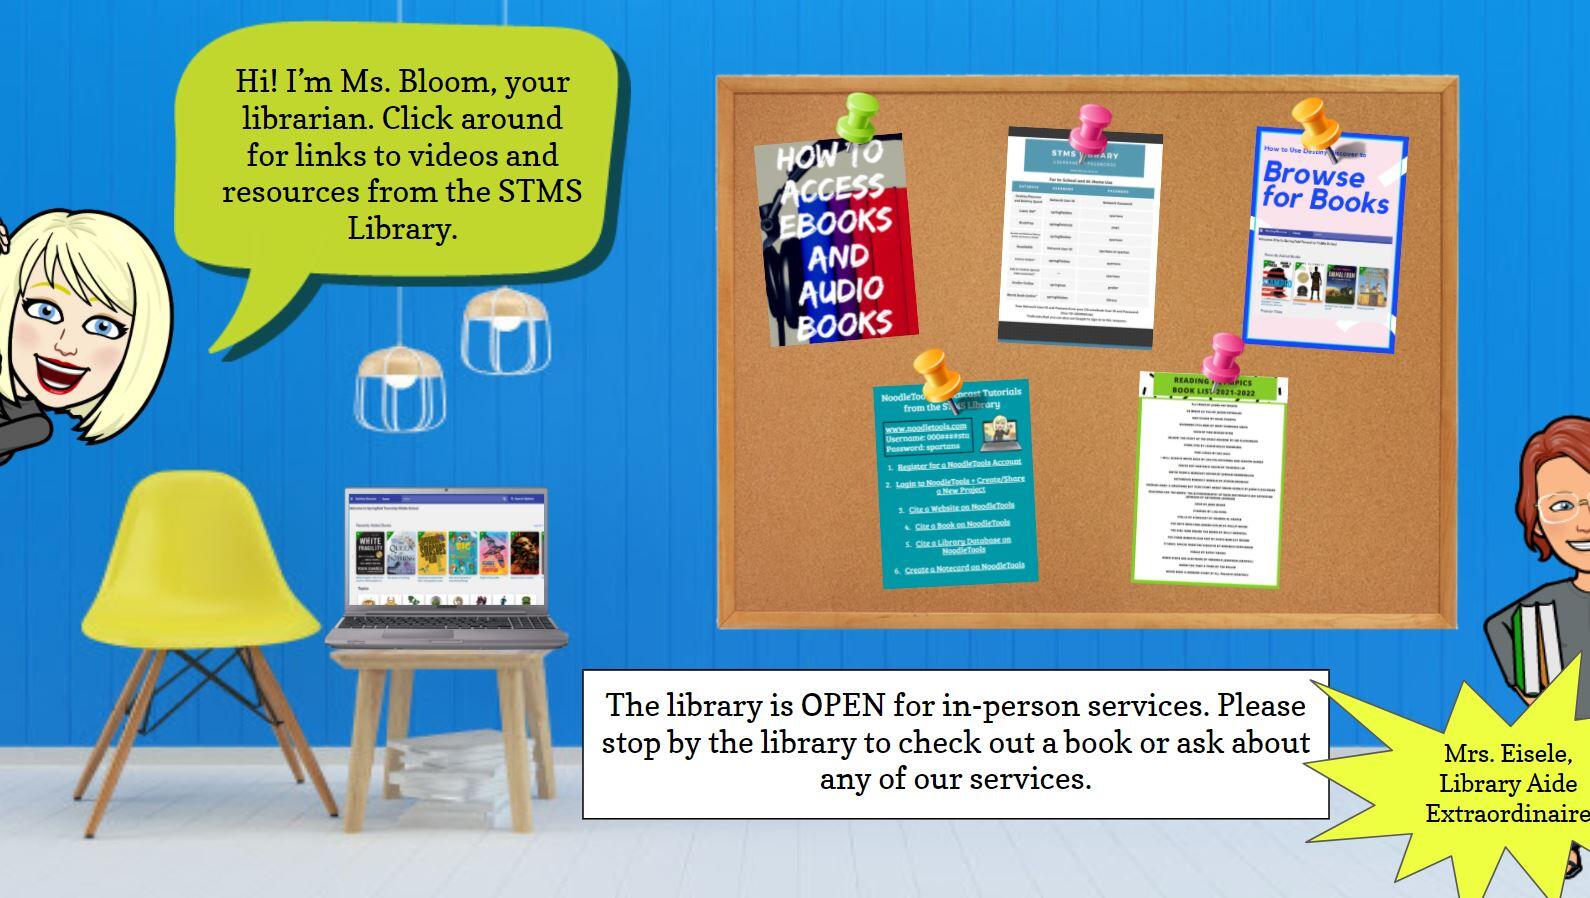 Ms. Bloom's STMS Virtual Library Orientation